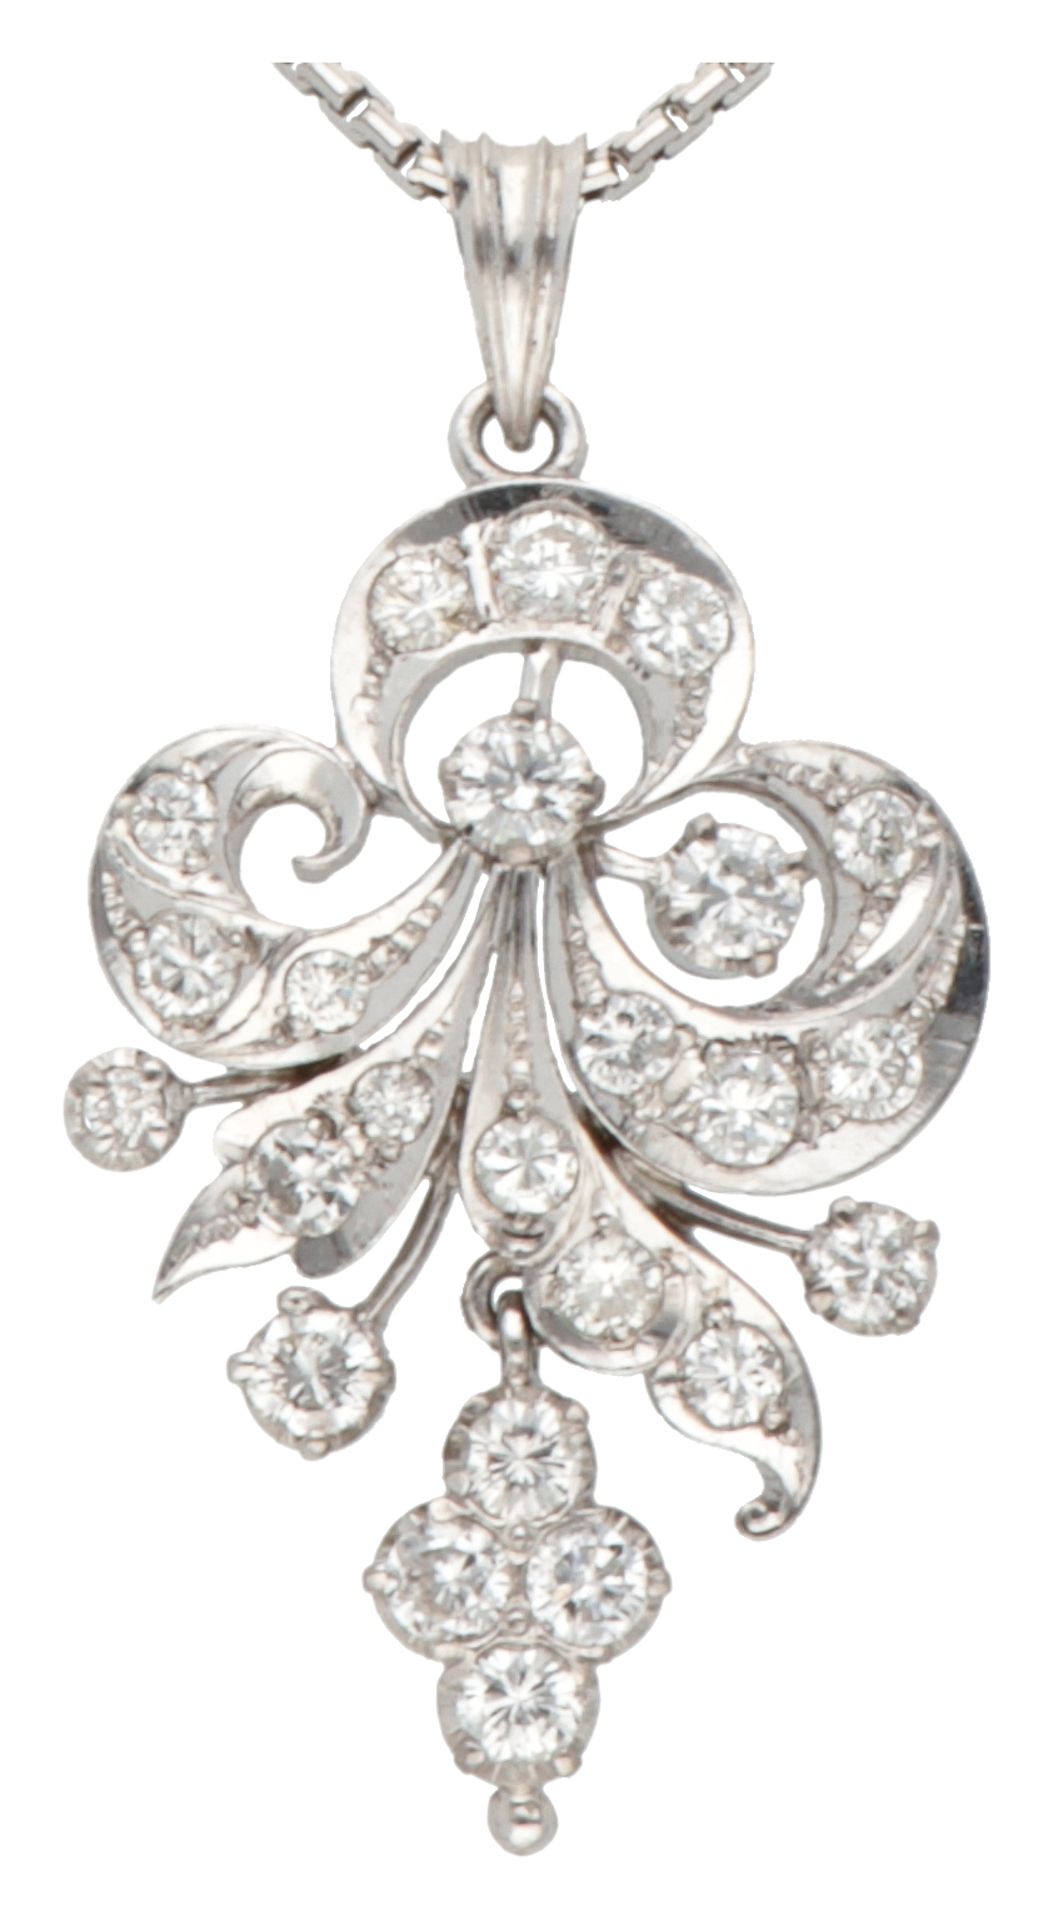 10K White gold asymmetrical diamond pendant on necklace set with approx. 0.72 ct. diamond. - Image 2 of 3